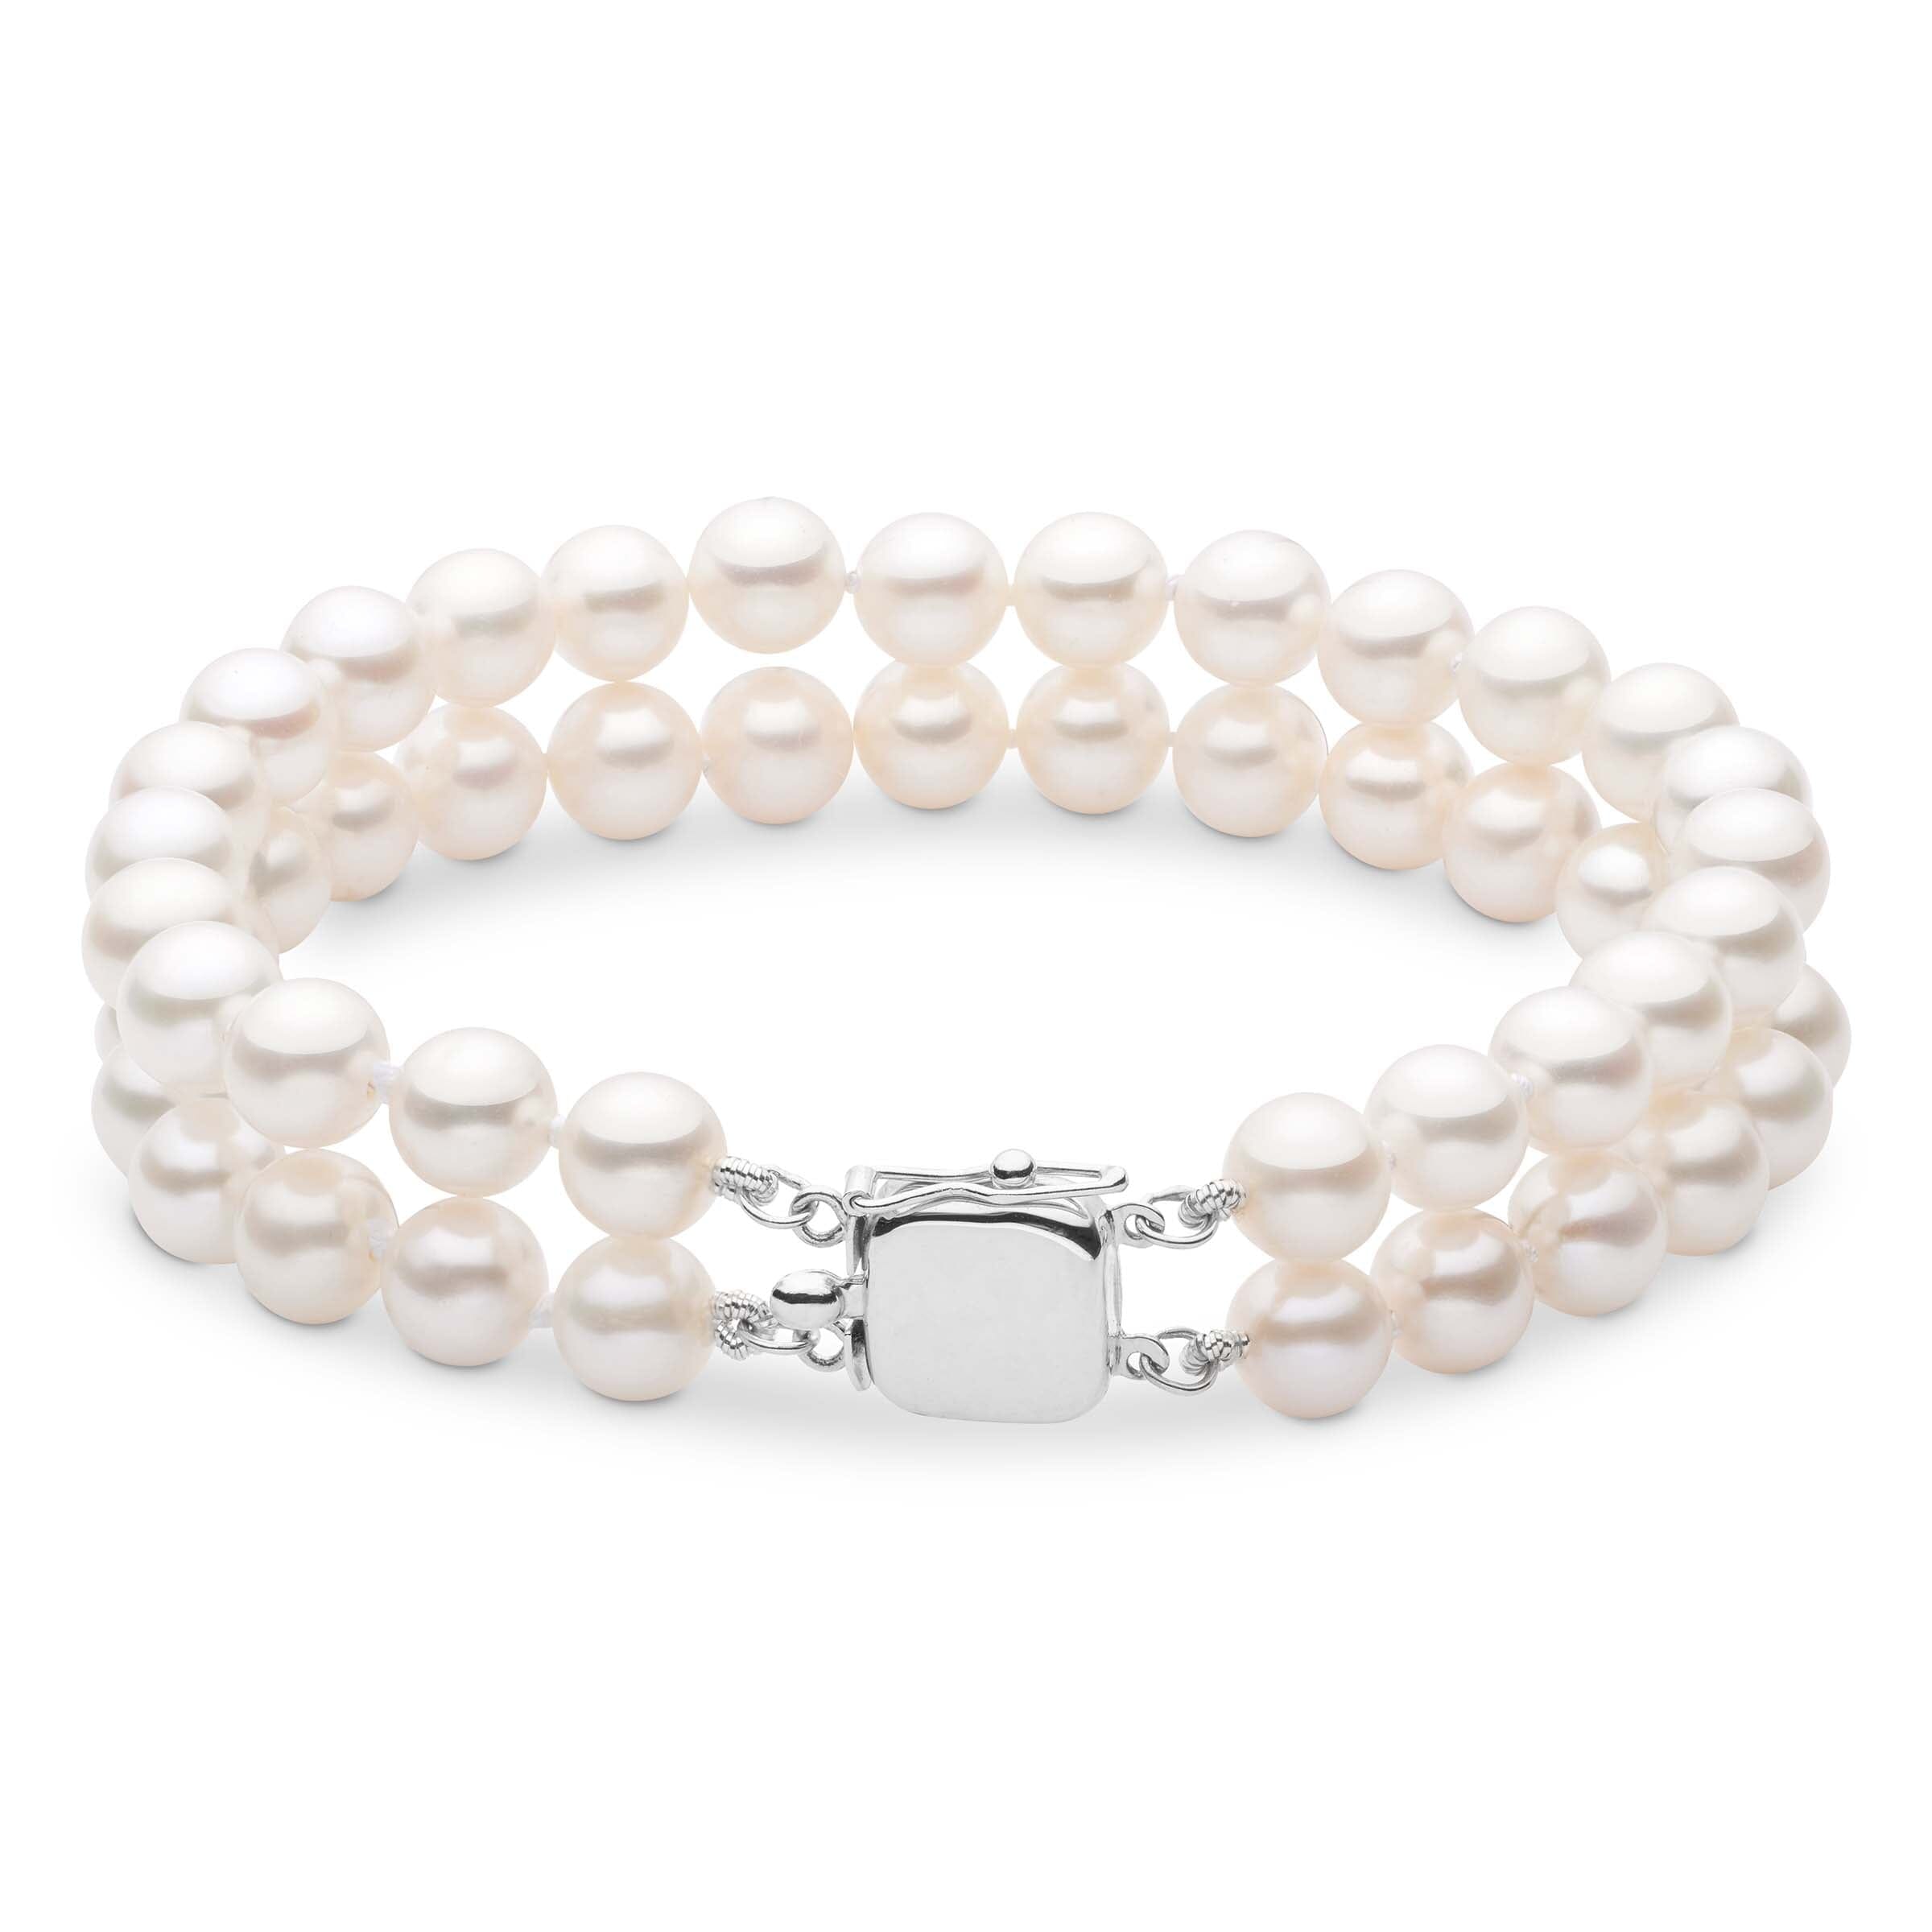 Personalized 7.5-8.0 mm AAA White Freshwater Pearl Double Strand Square Clasp Bracelet